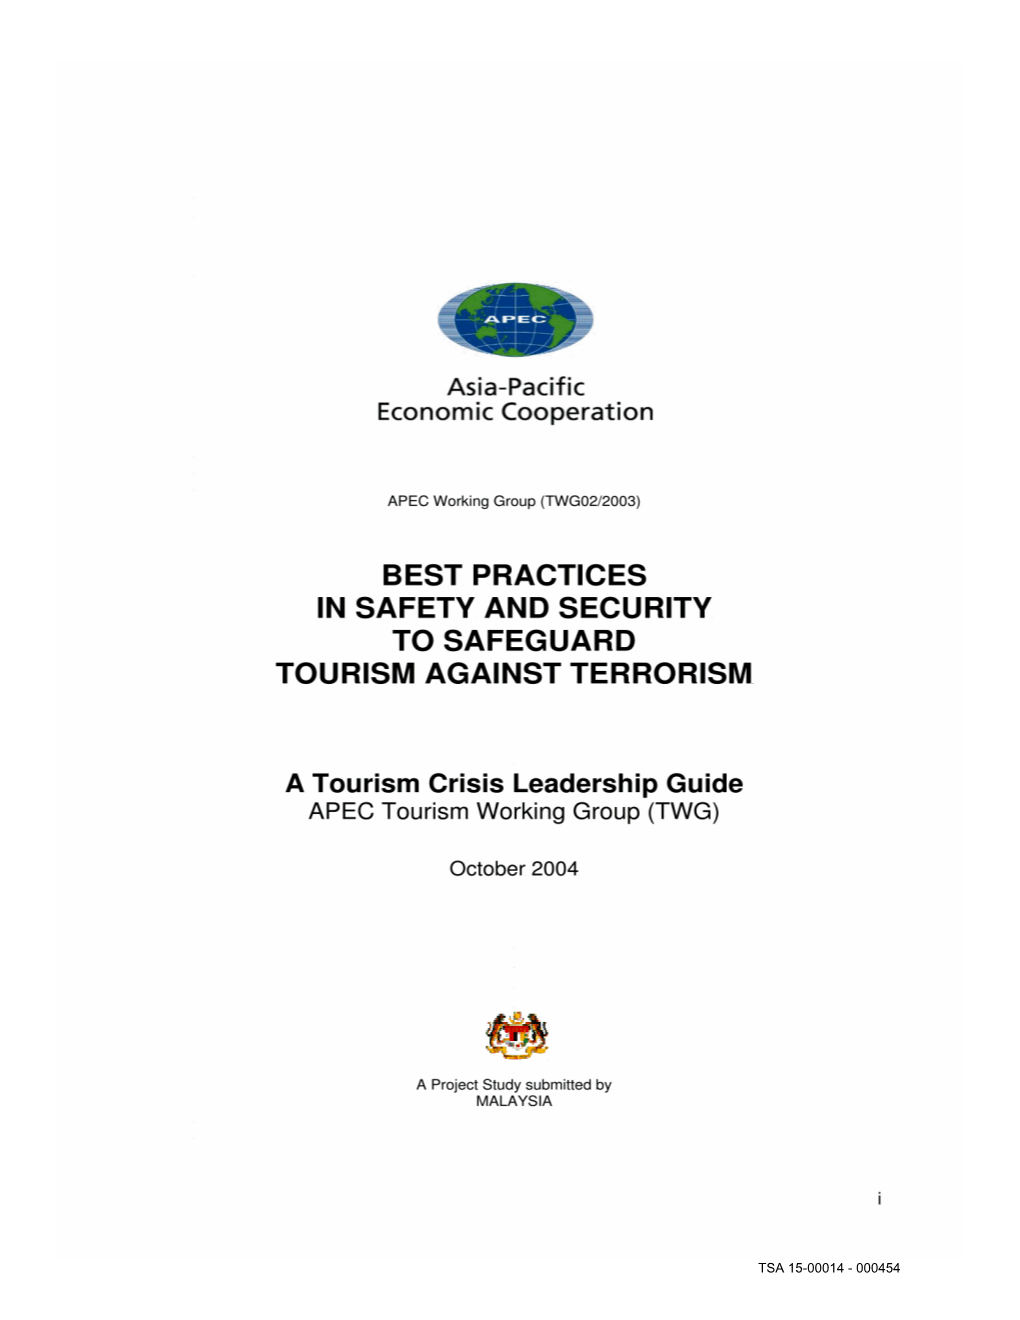 Best Practices in Safety and Security to Safeguard Tourism Against Terrorism